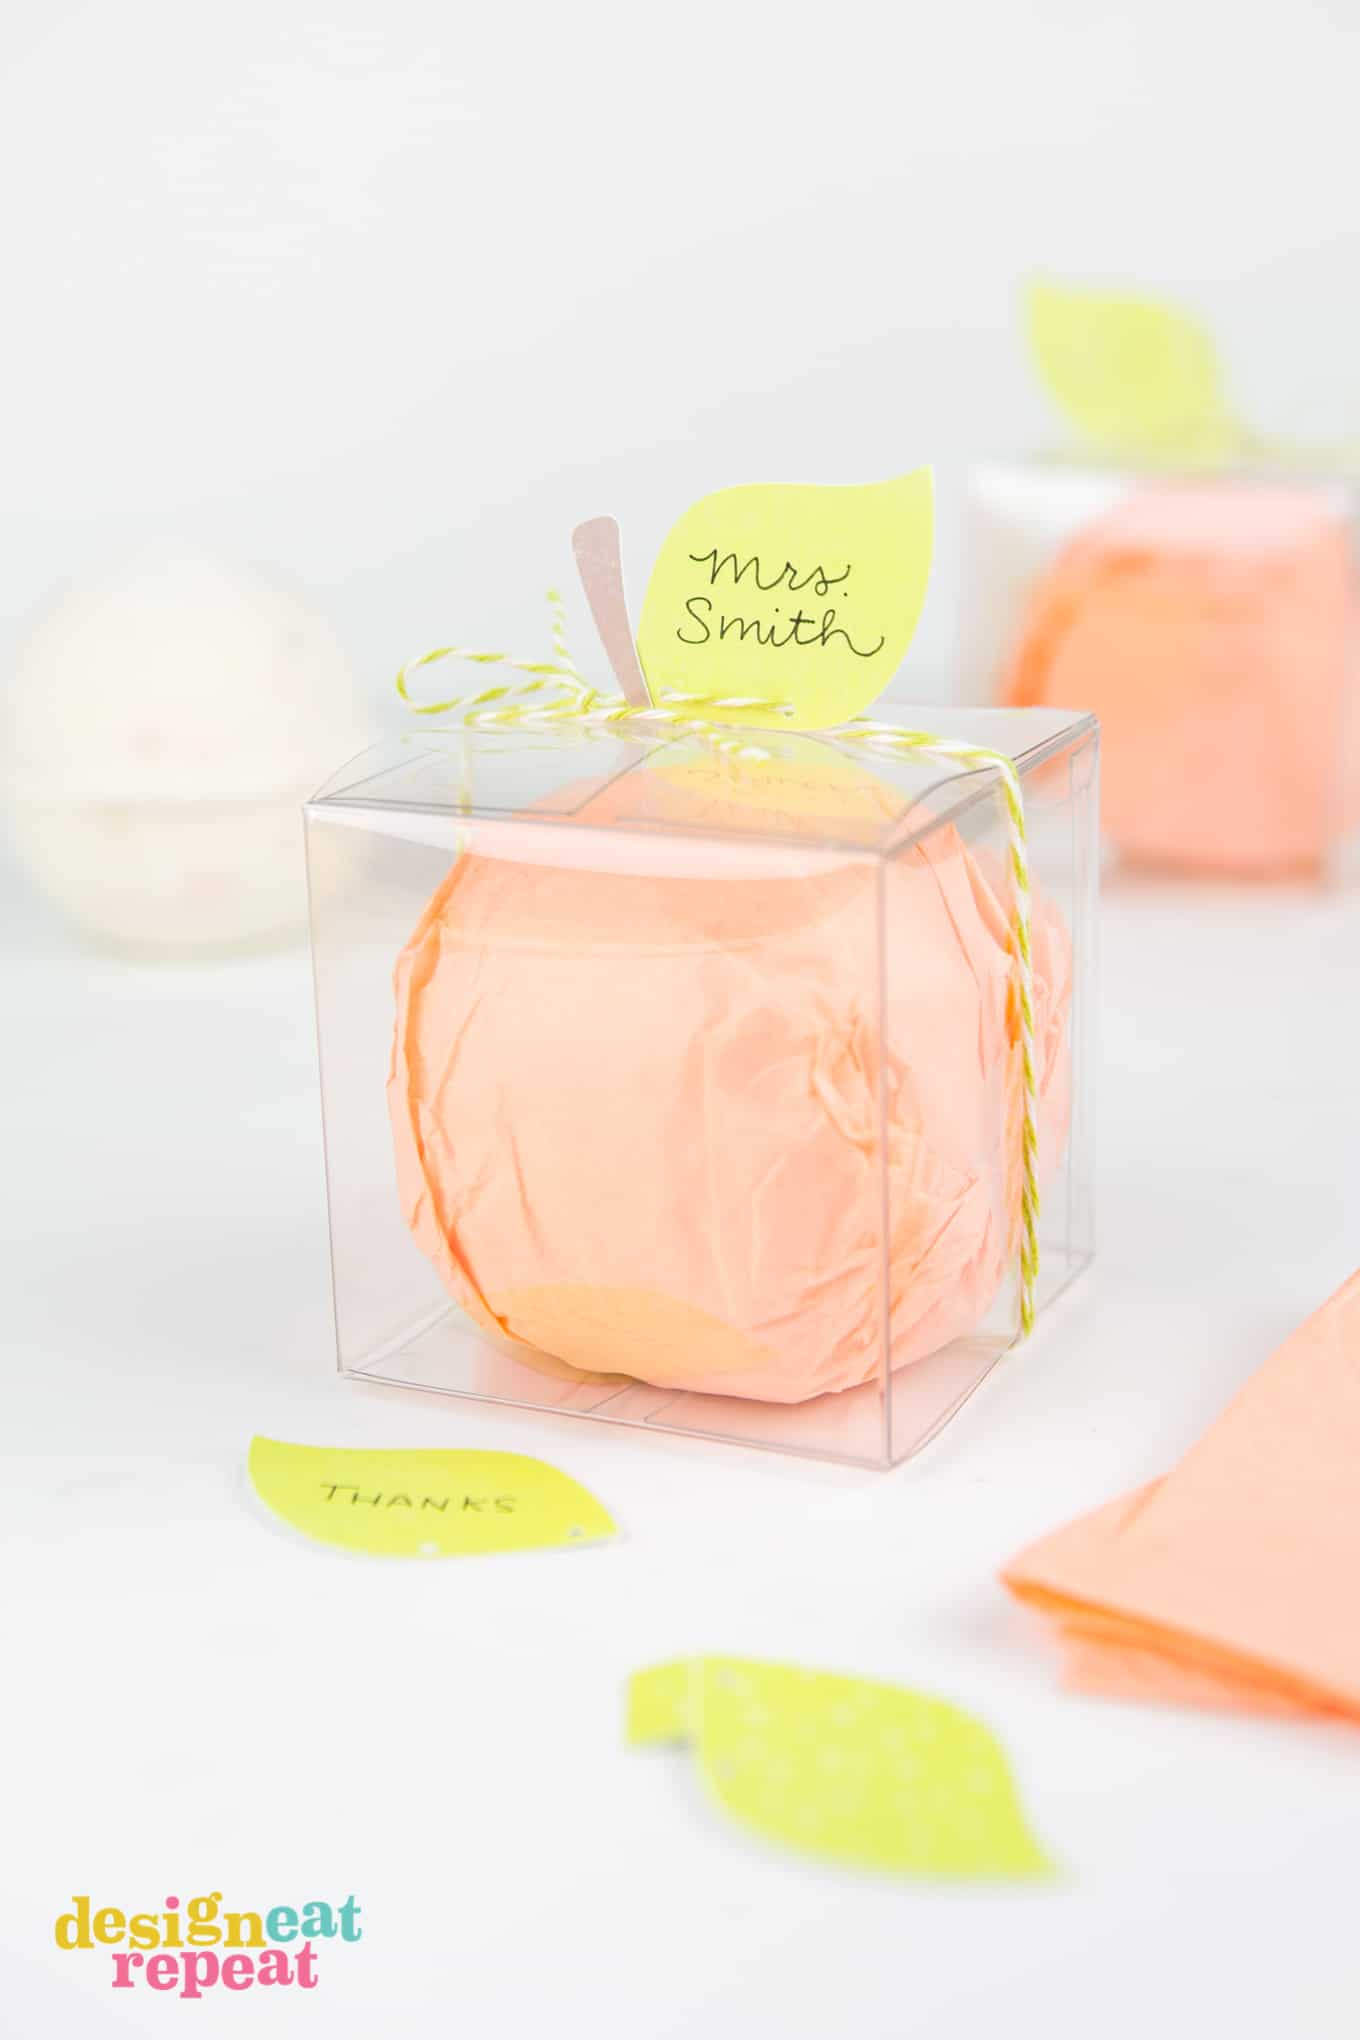 With back to school just around the corner, give the gift of relaxation with this peachy bath bomb teacher gift idea! Also great for thank you gifts, southern wedding party favors, or fruit party favors!